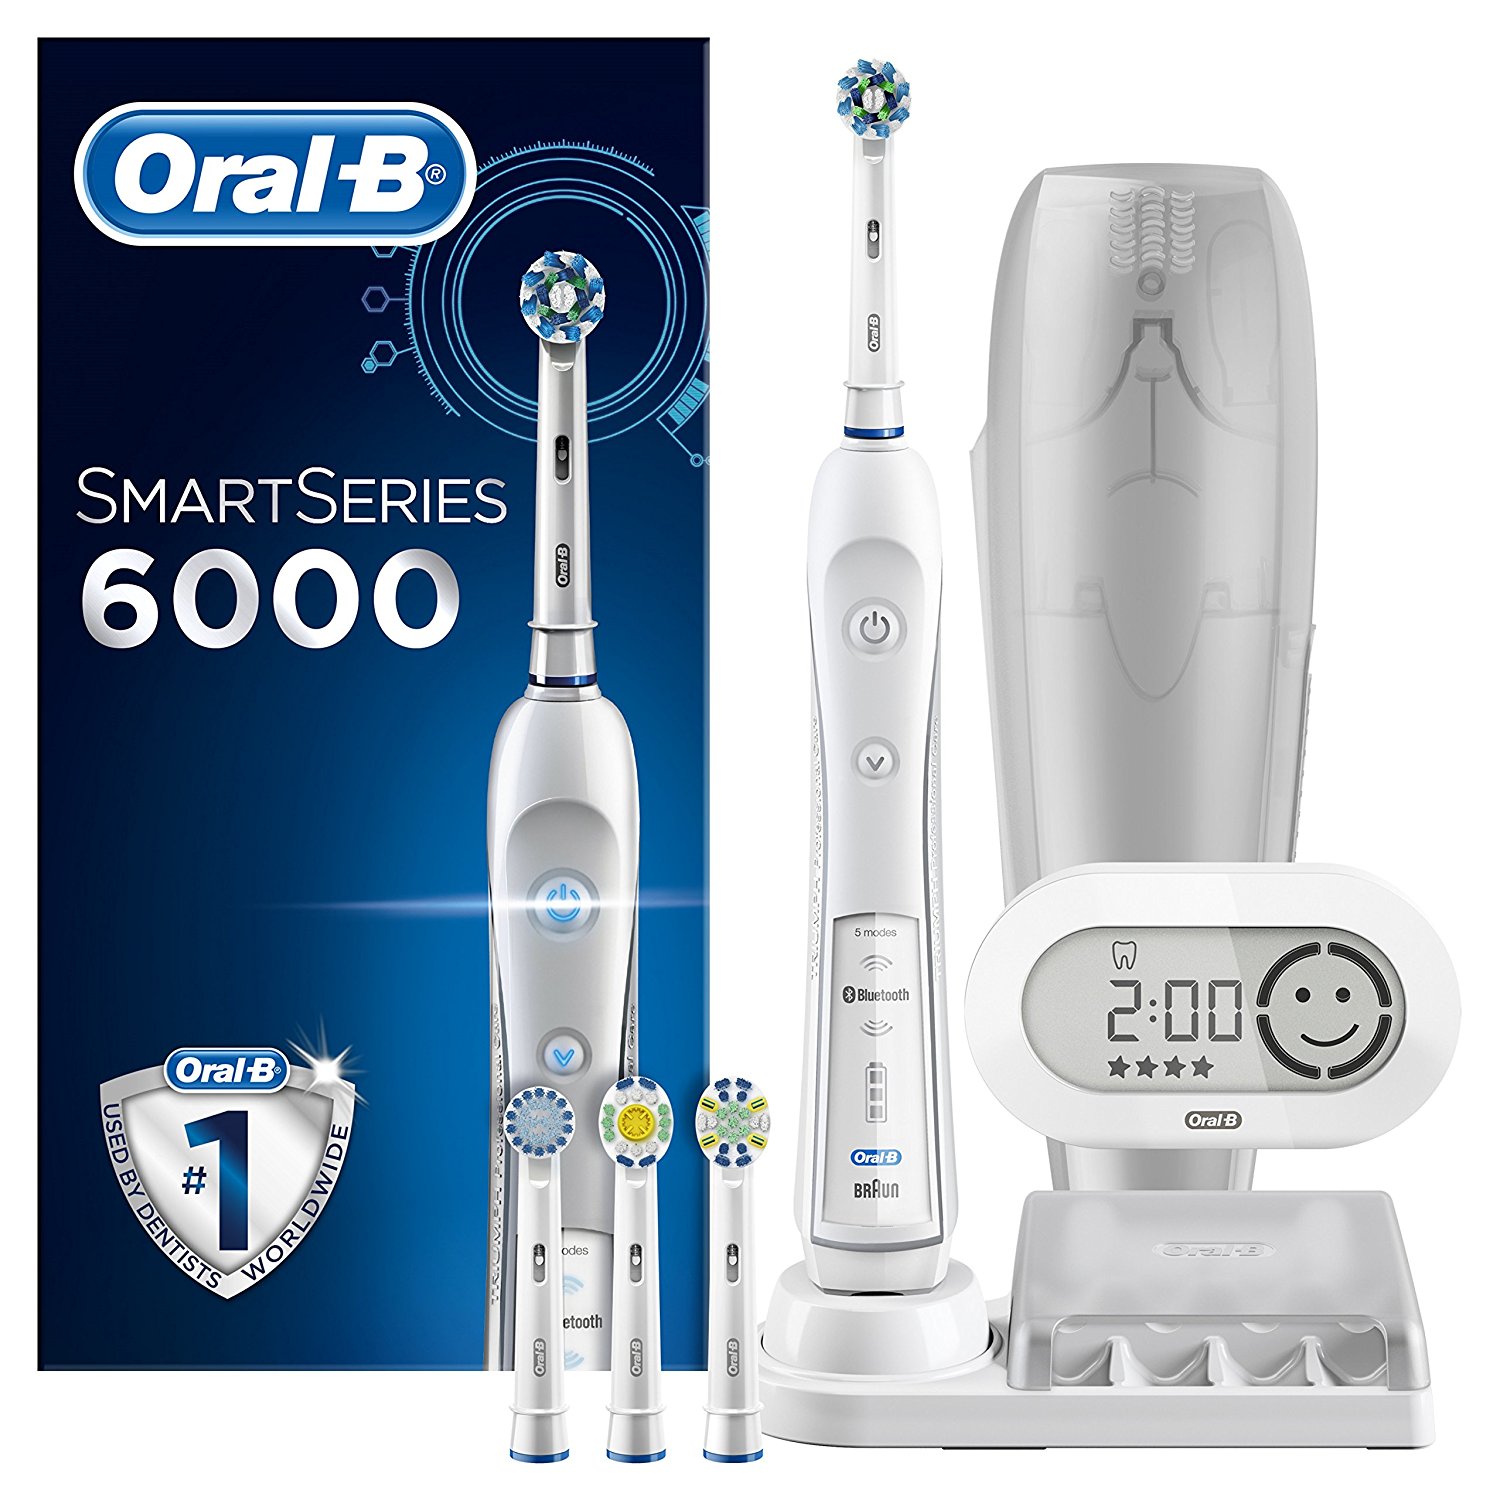 K p Oral B Smart Series 6000 CrossAction Electric Rechargeable 